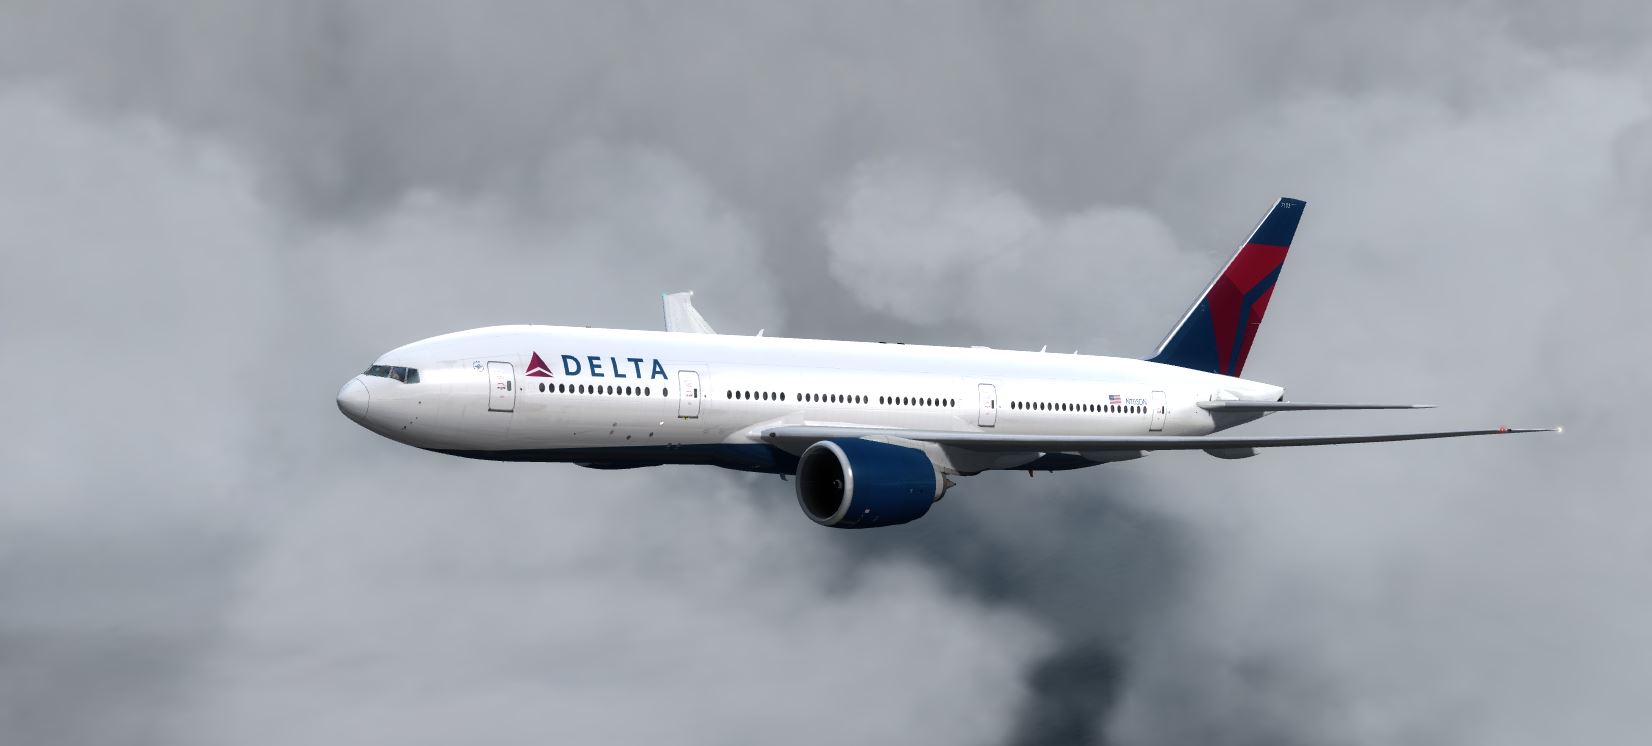 B777-200 Delta Airlines Standard Livery-9166 